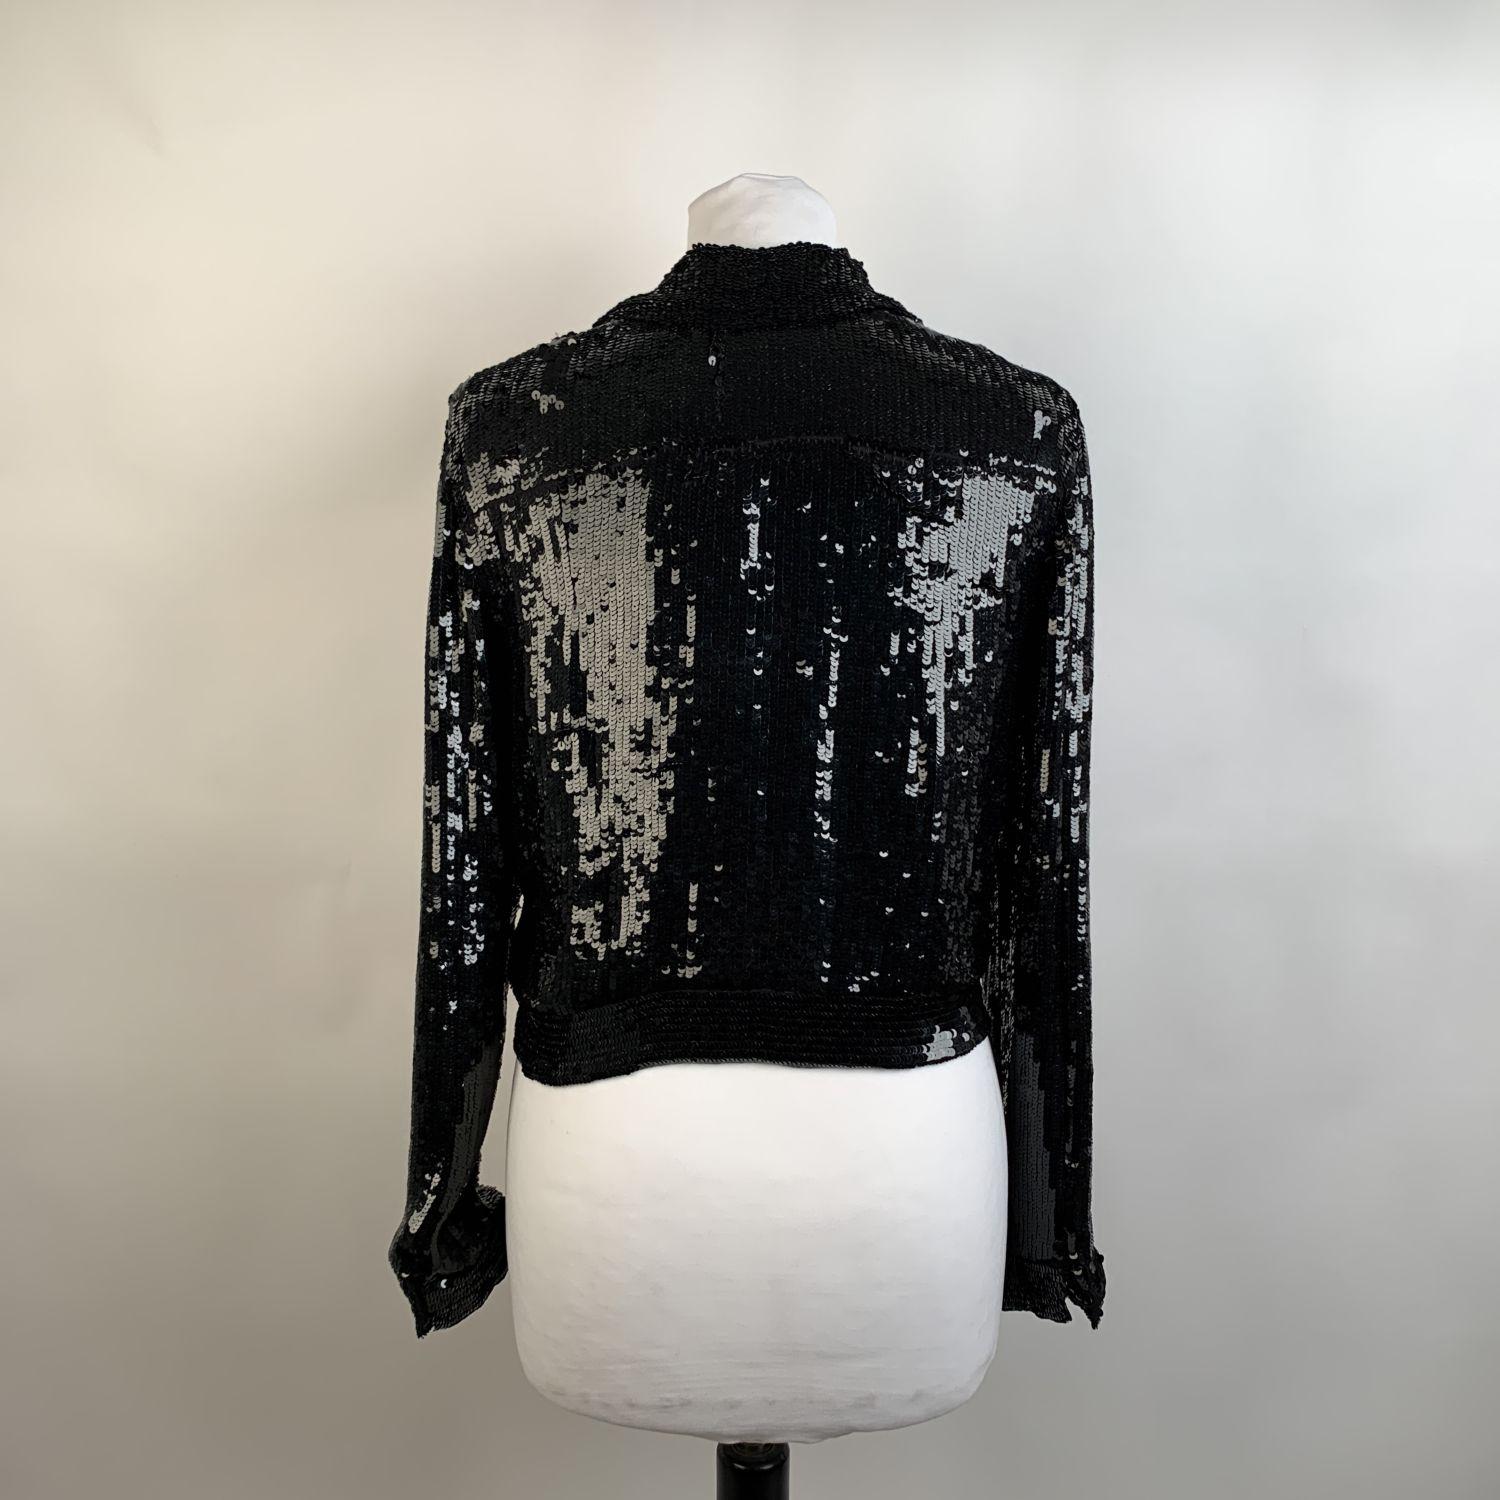 Blumarine black sequin jacket. It features a jeans jacket style, a buttoned front, 2 front mock chest flap pockets and long sleeve styling . Chiffon lining. Size is not indicated. Estimated size is a SMALL size



Details

MATERIAL: Sequins

COLOR: